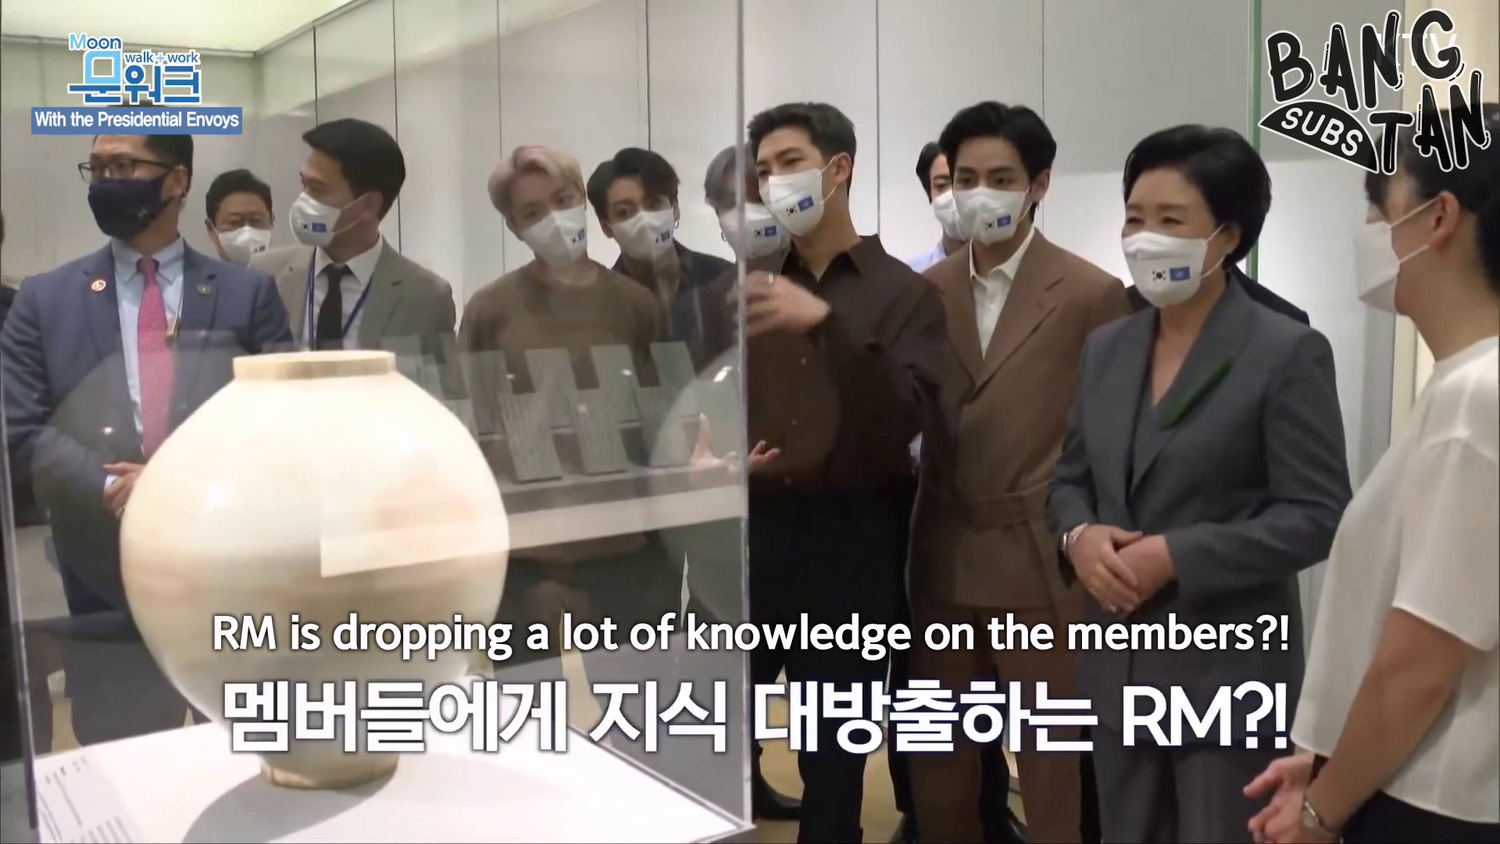 210921 BTS' Visit to the Metropolitan Museum with First Lady Kim Jung-sook  — BTS-TRANS/BANGTANSUBS